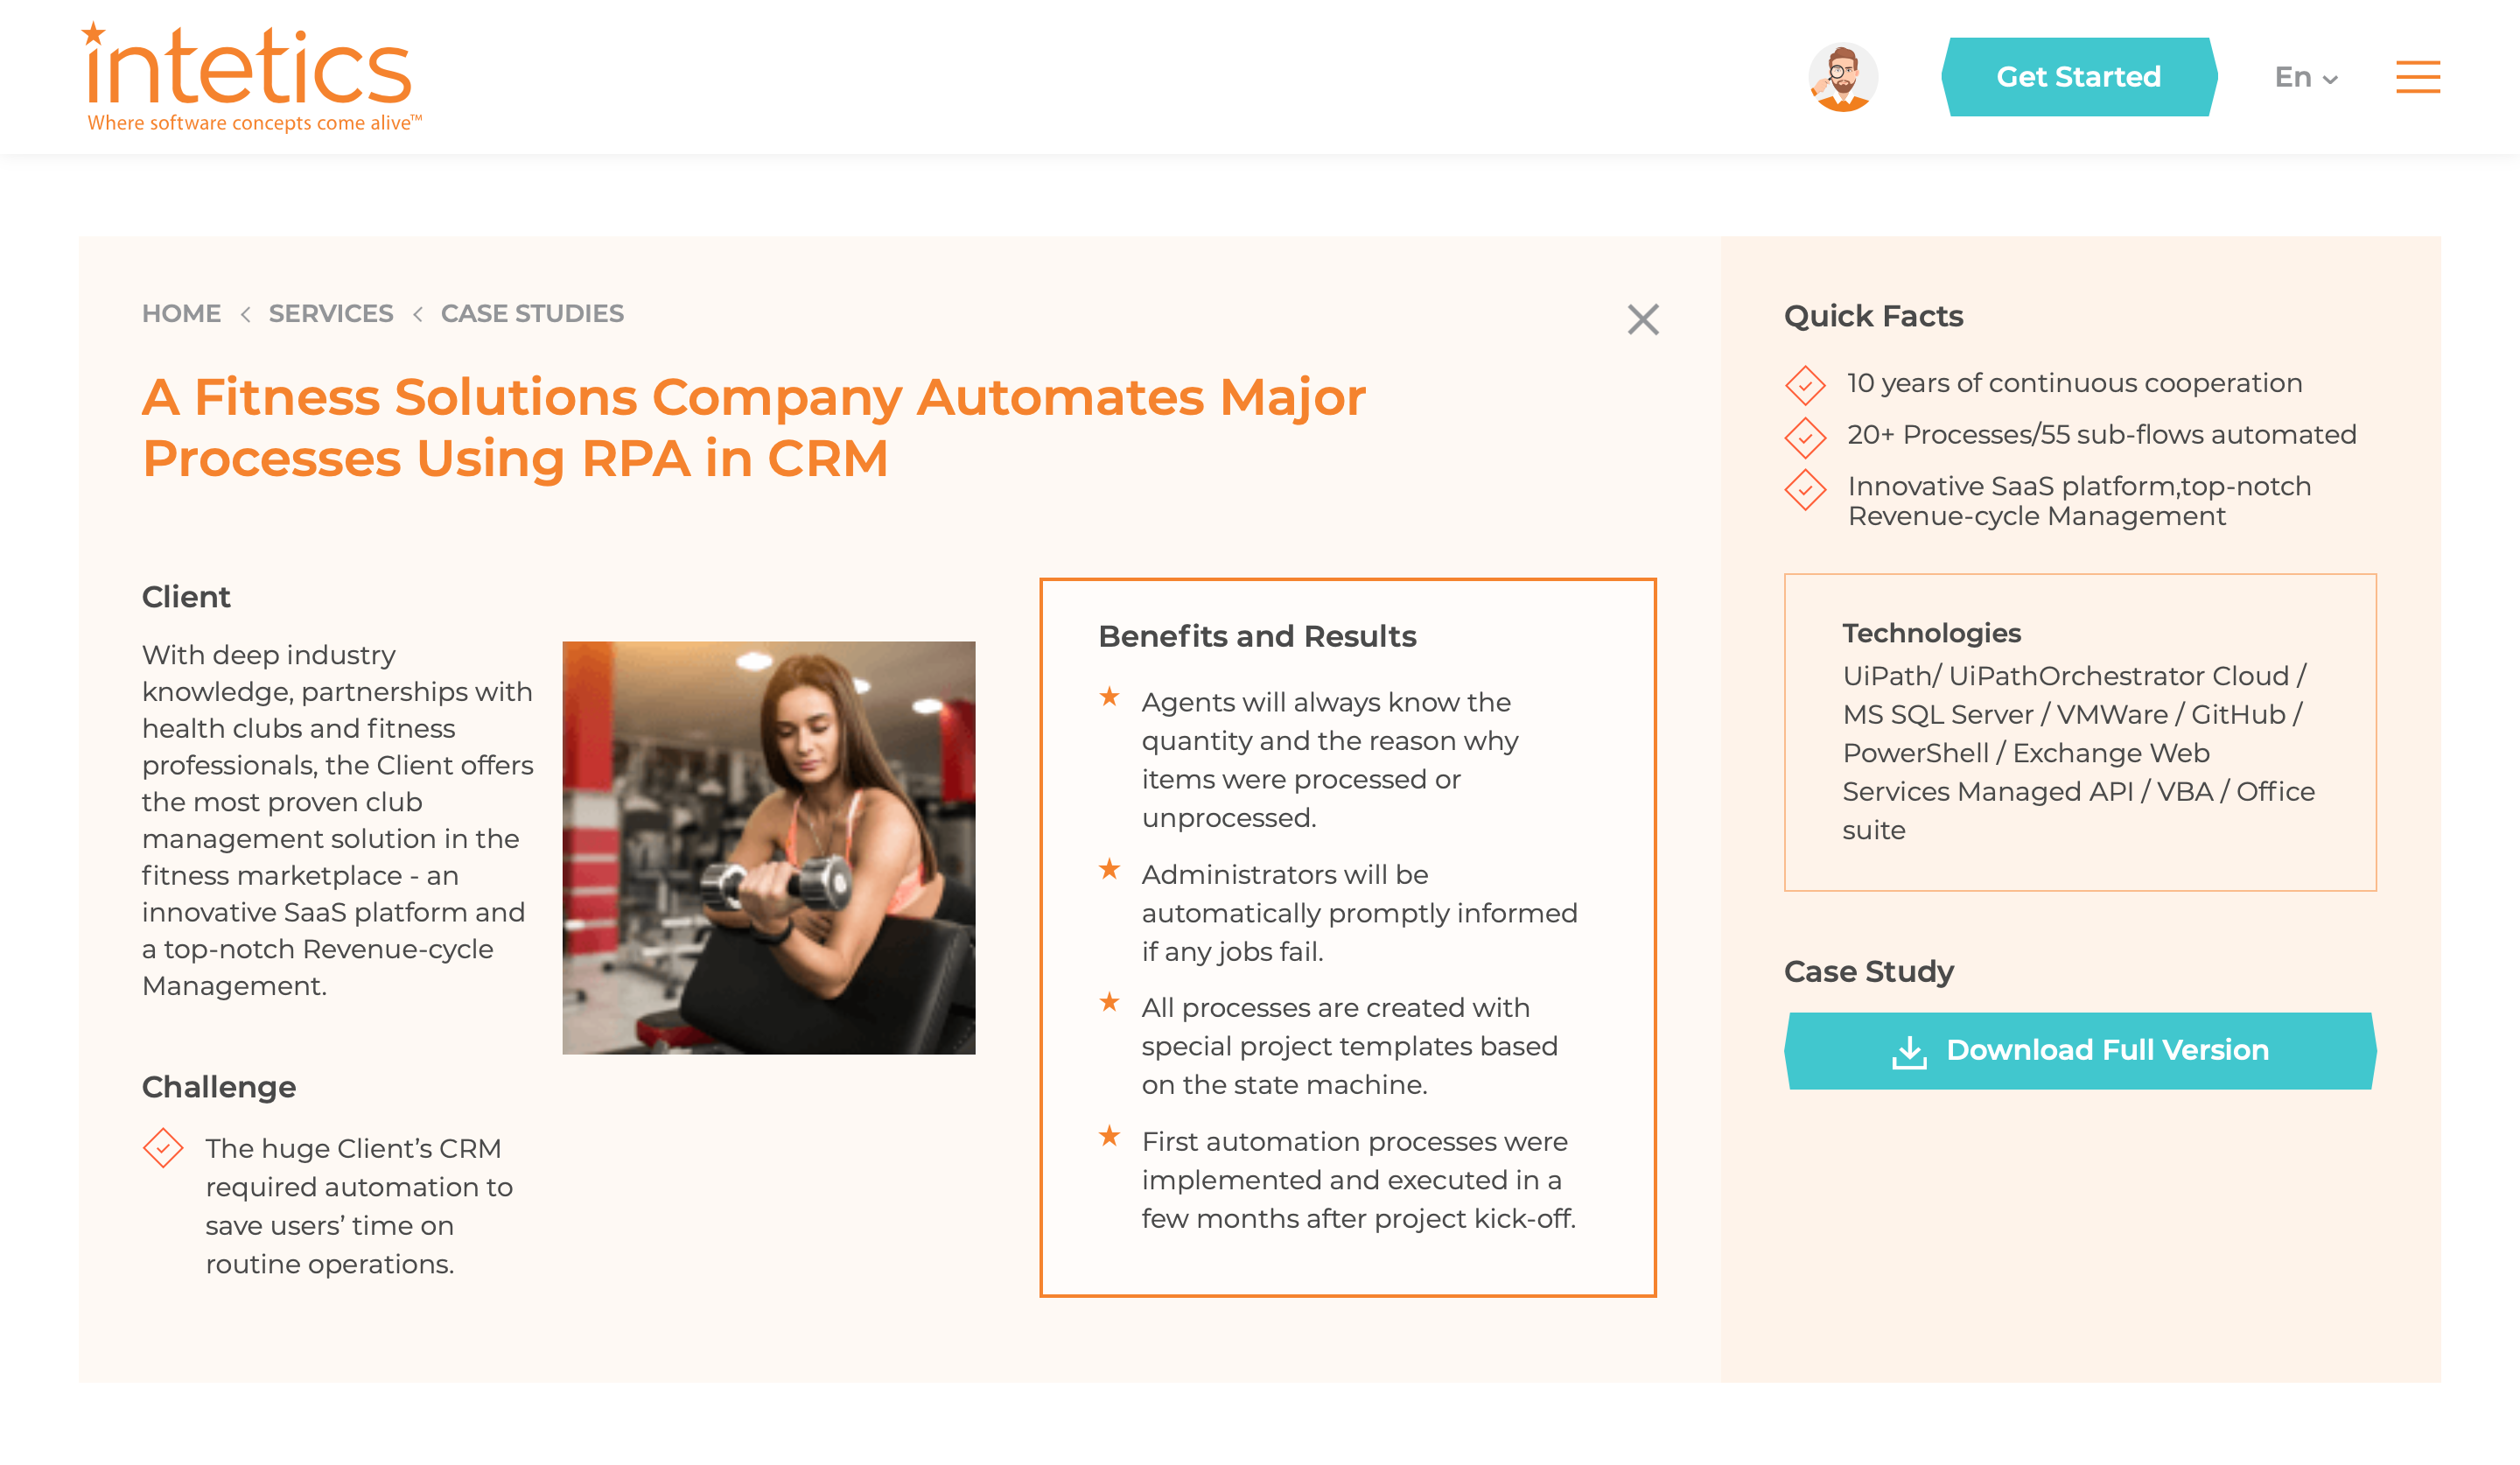 A Fitness Solutions Company Automates Major Processes Using RPA in CRM 